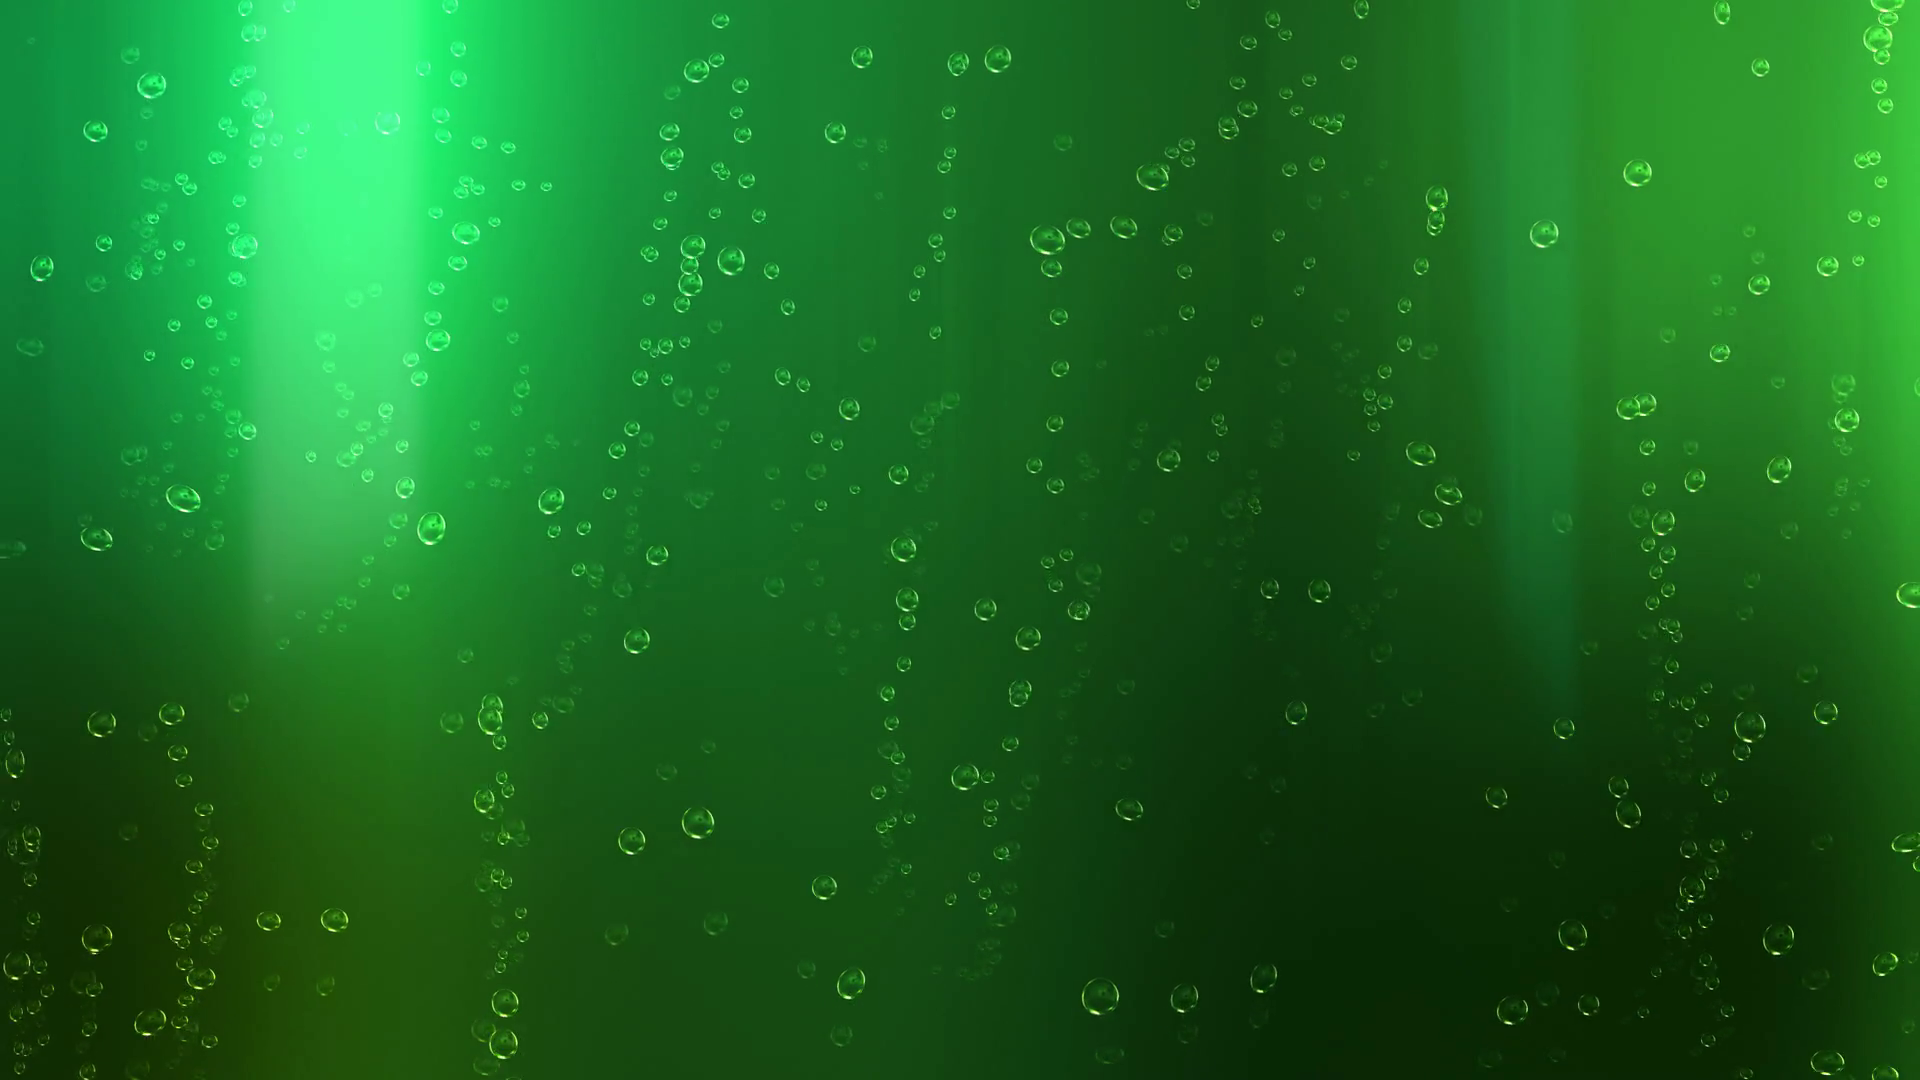 Green Beer Soda Loop - Seamless looping animation of bubbles from ...